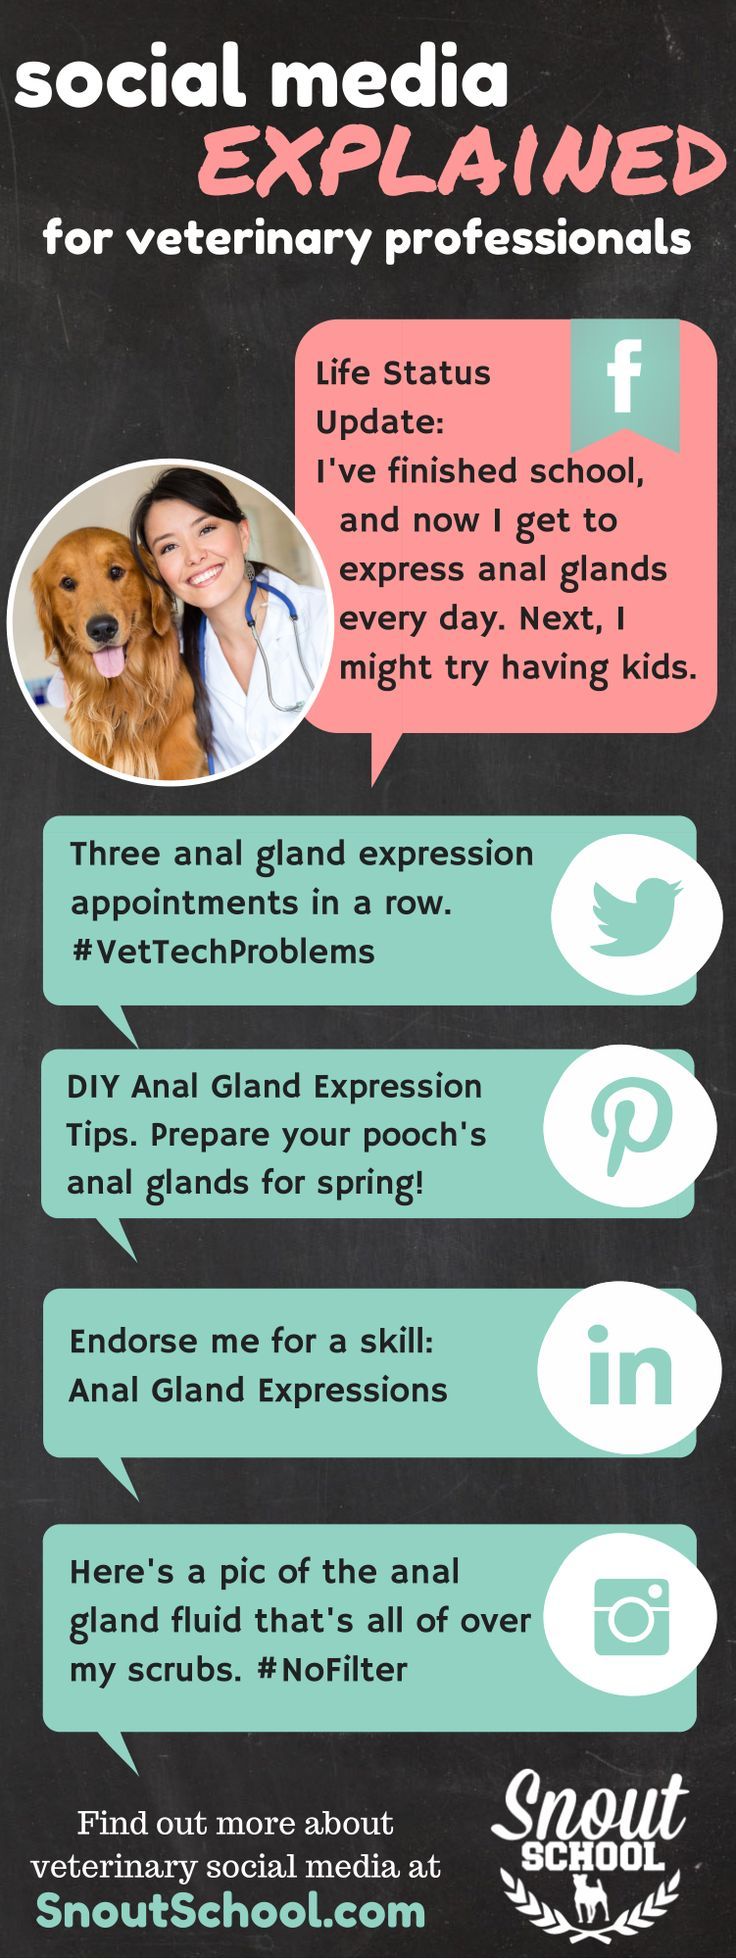 its important for any vet tech or veterinarian to know the differences between social media platforms